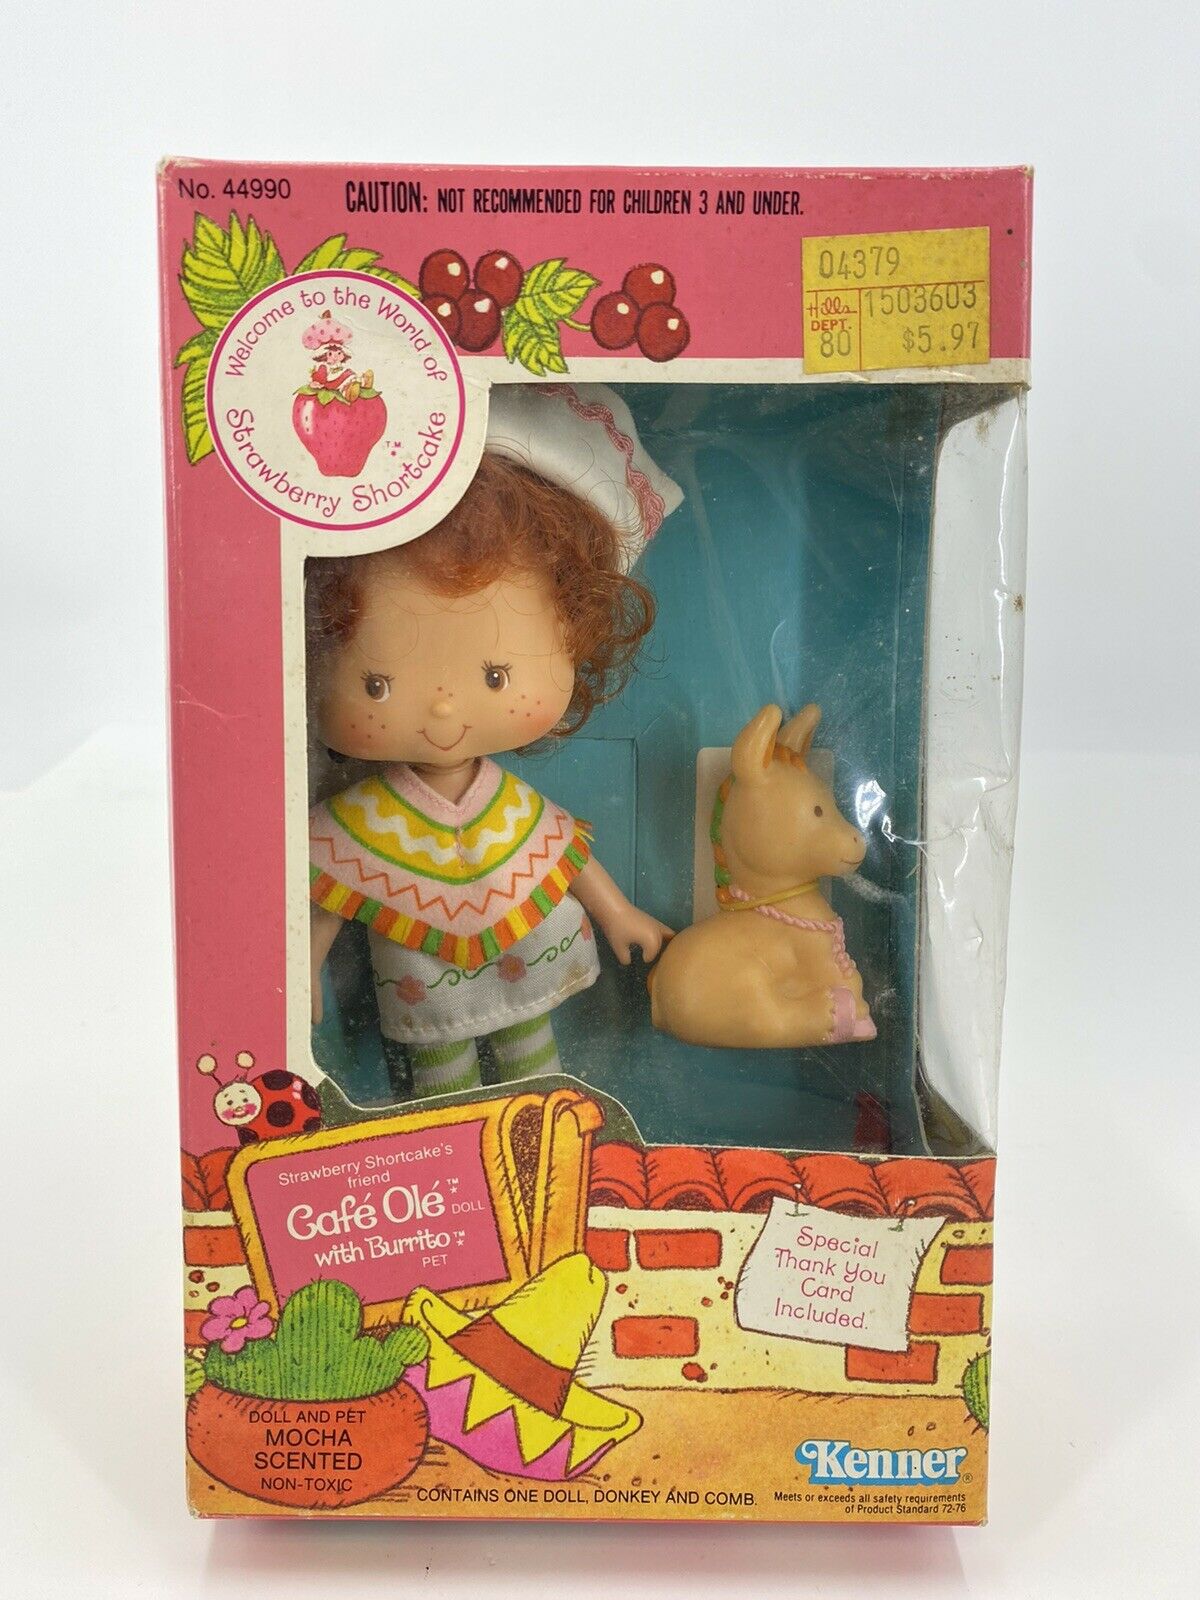 Vintage Kenner Strawberry Shortcake Cafe Ole Doll With Burrito Pet 44990